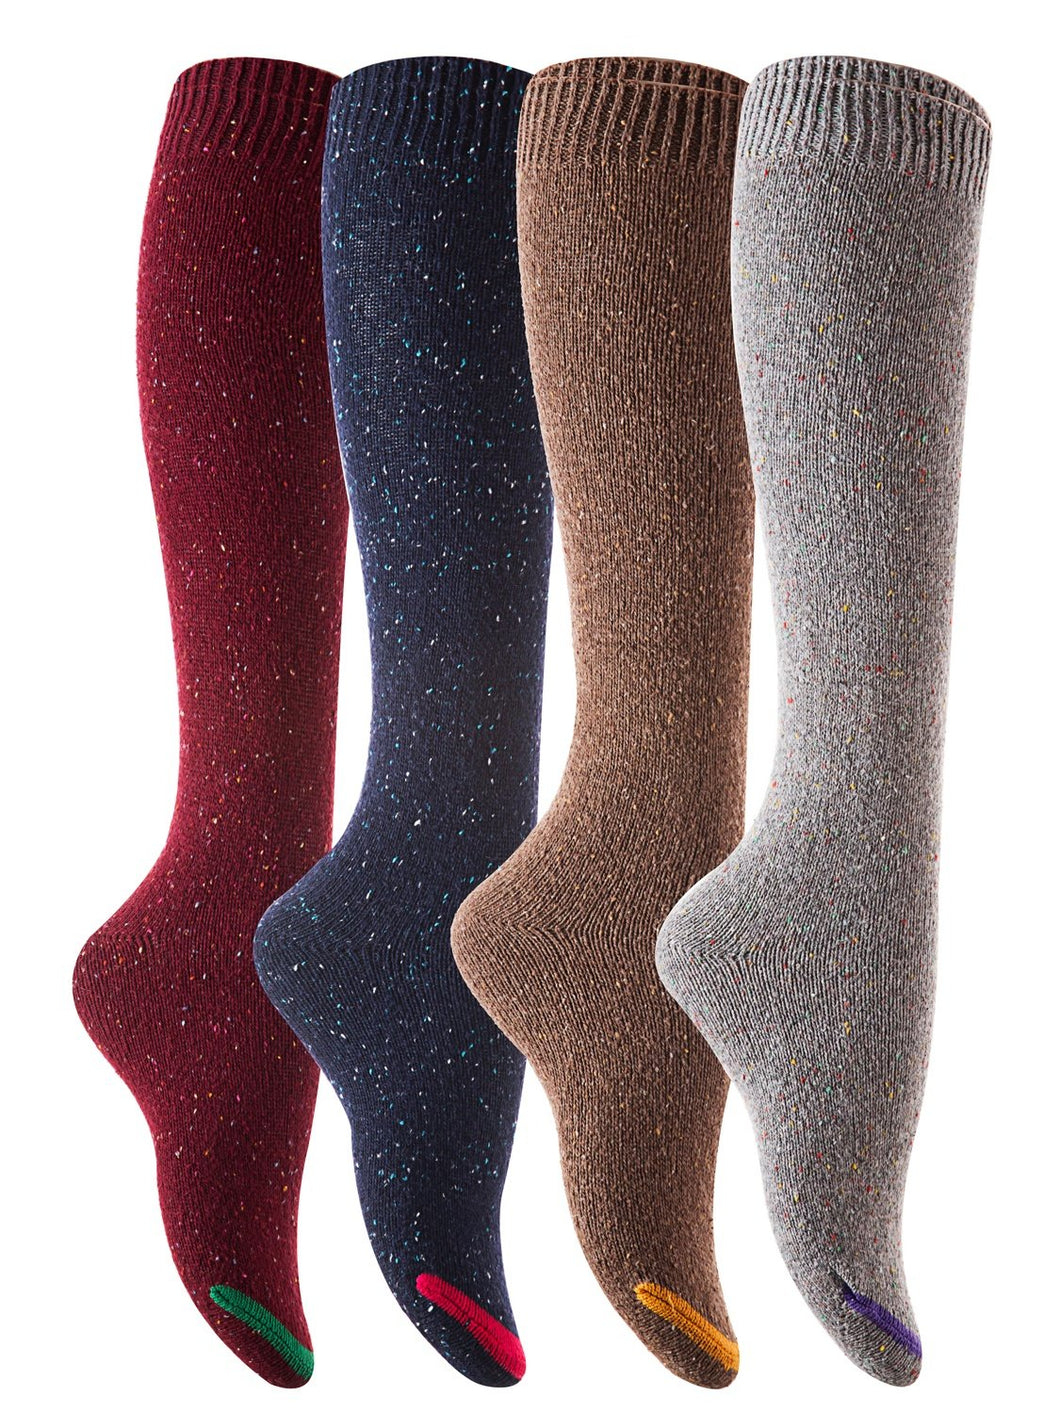 Lian Style Women's 4 Pairs Pack Knee-high Cotton Boot Socks 6-9 Style 8212-3 (4 Color w/o Black)